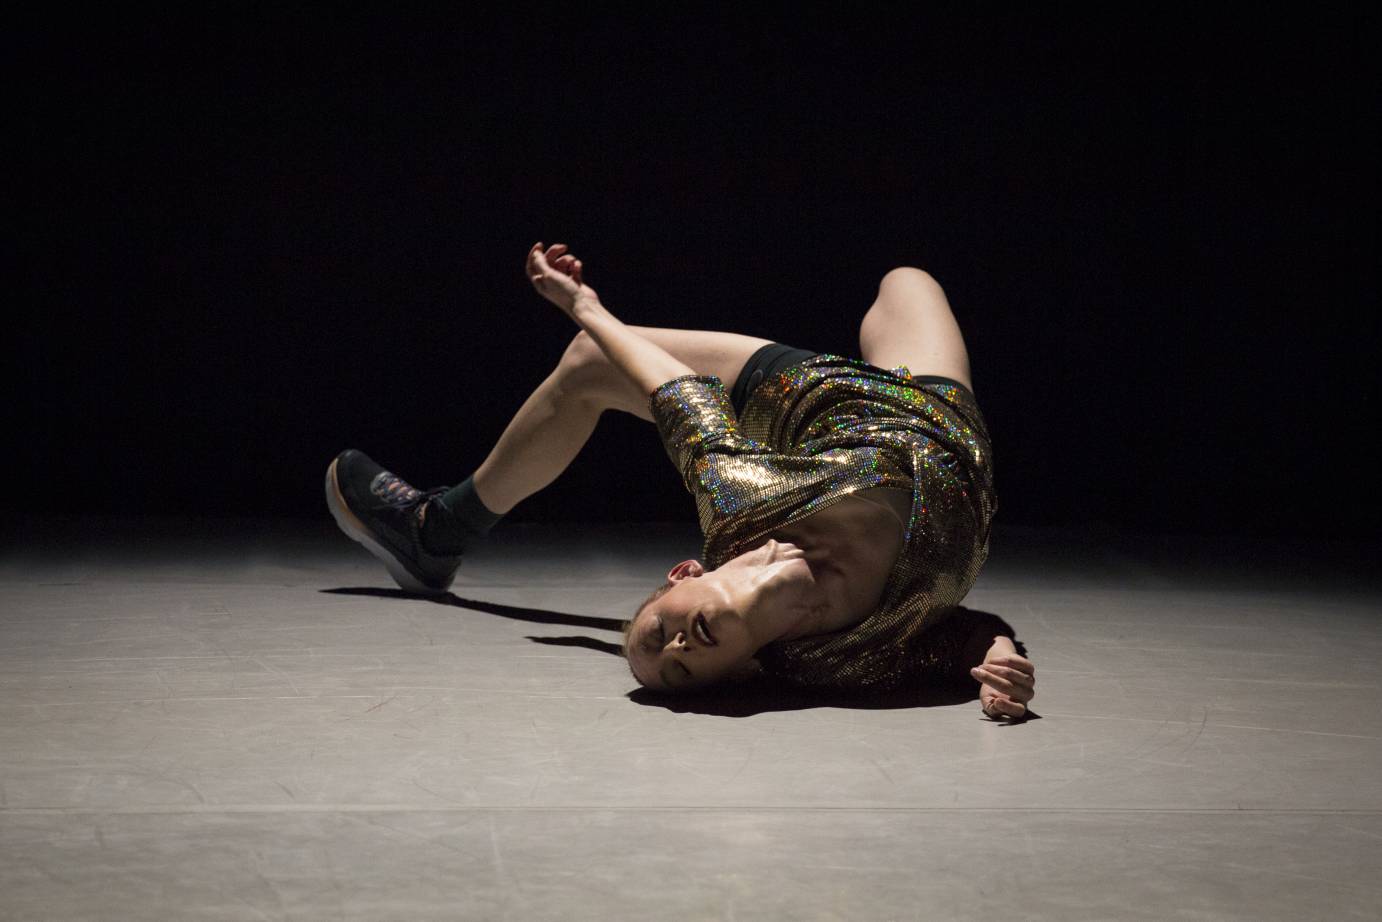 Woman curved and spiraled in an arch on the floor, she lies on her right shoulder with her face upside down. Her left black sneakerd foot is flexed. She wears a patterned, shiny top and short black shorts.